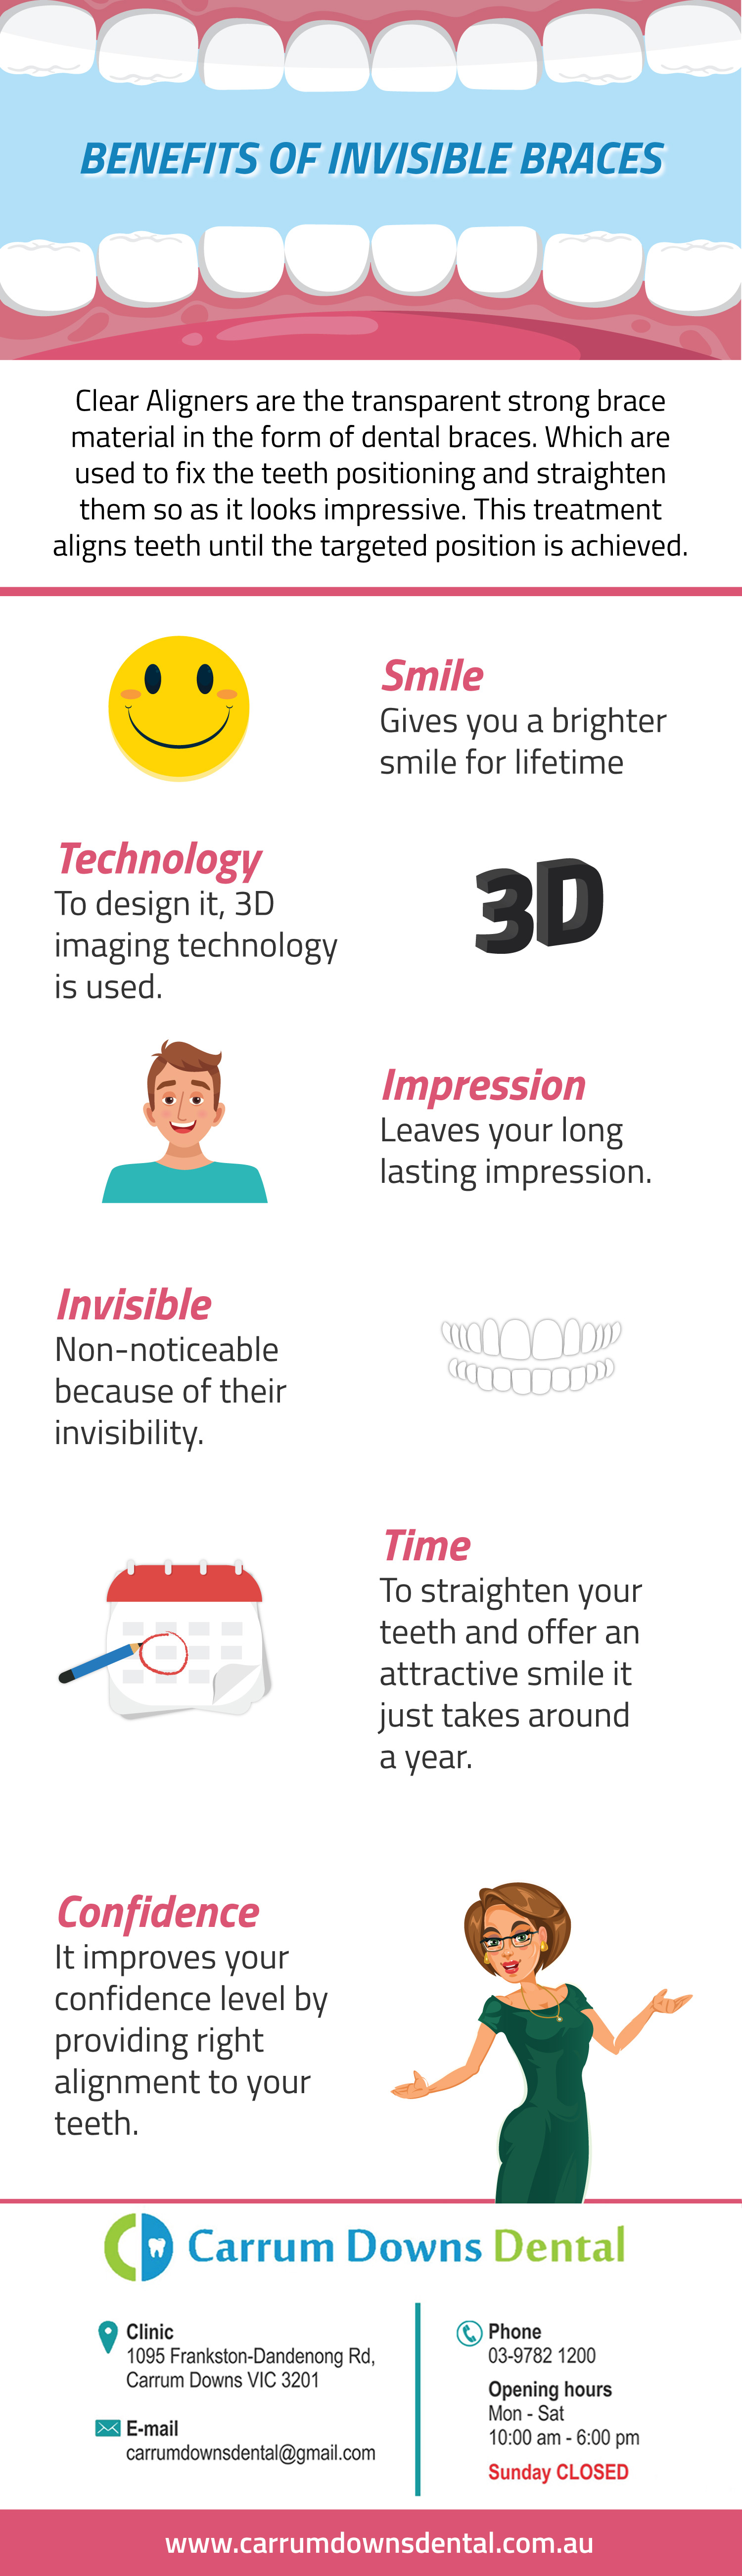 Benefits of Invisible Braces - Dental Infographics